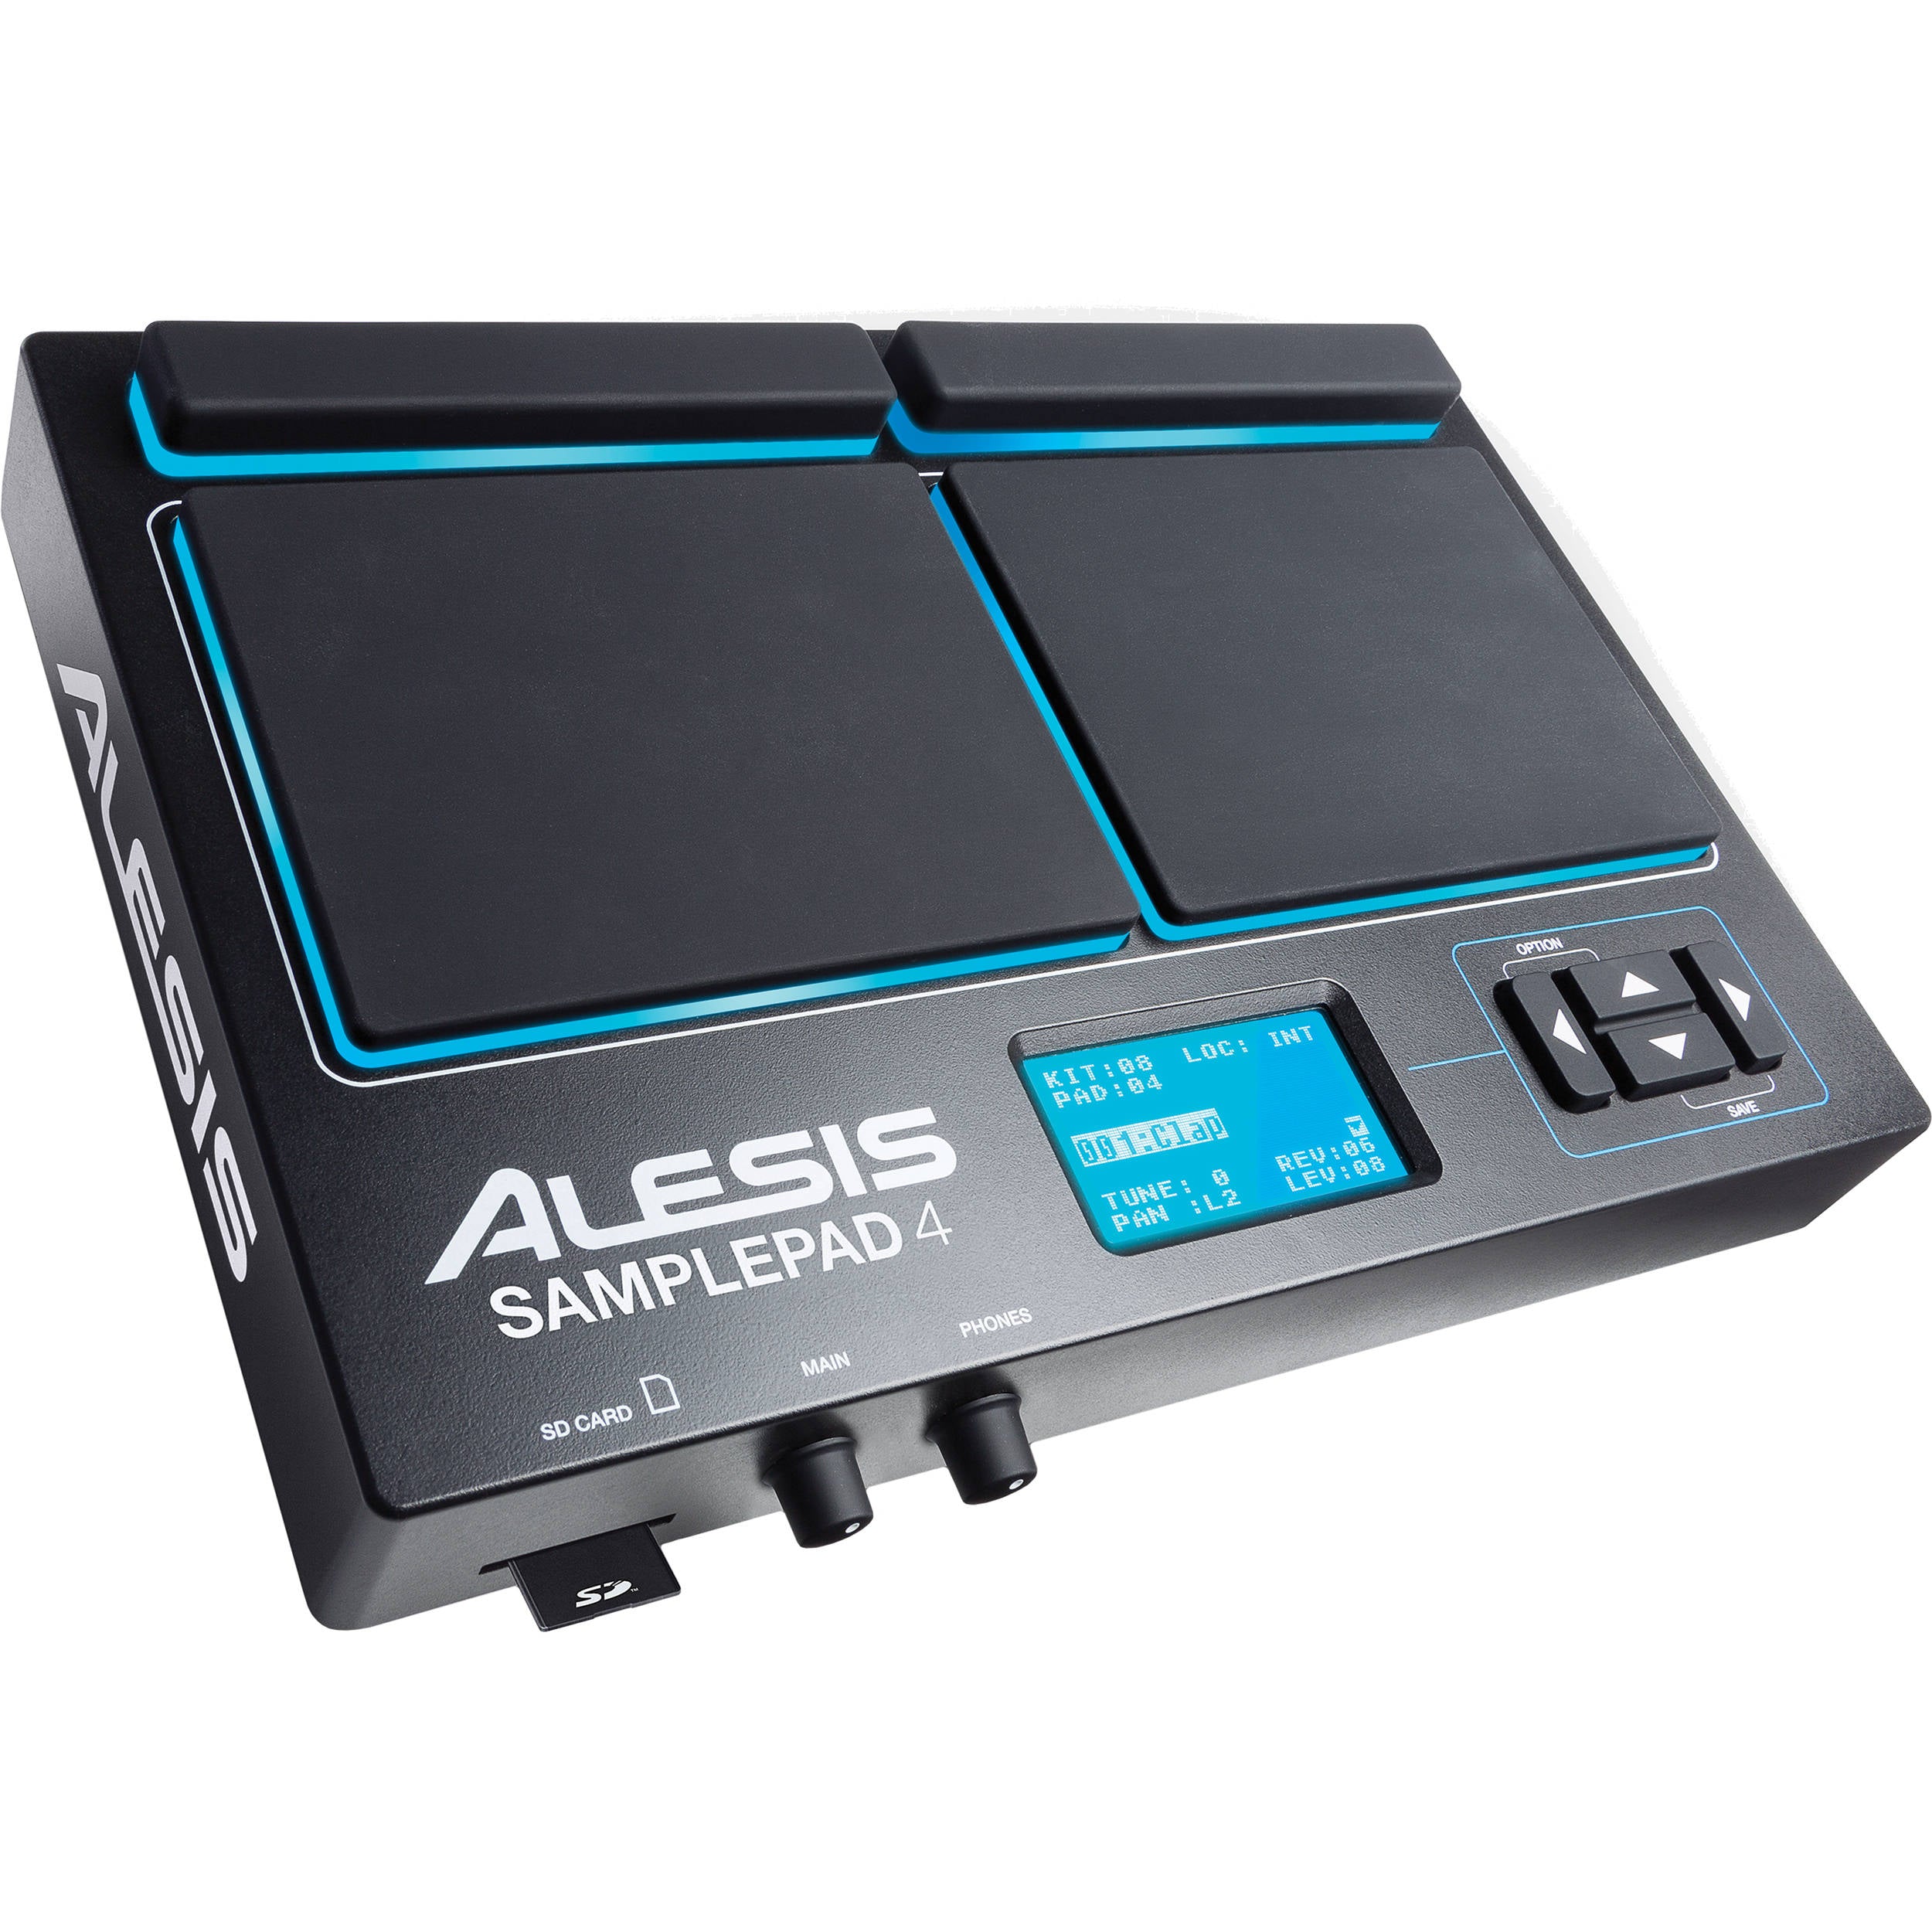 Alesis SamplePad 4, Four-Pad Percussion and Sample-Triggering Instrument